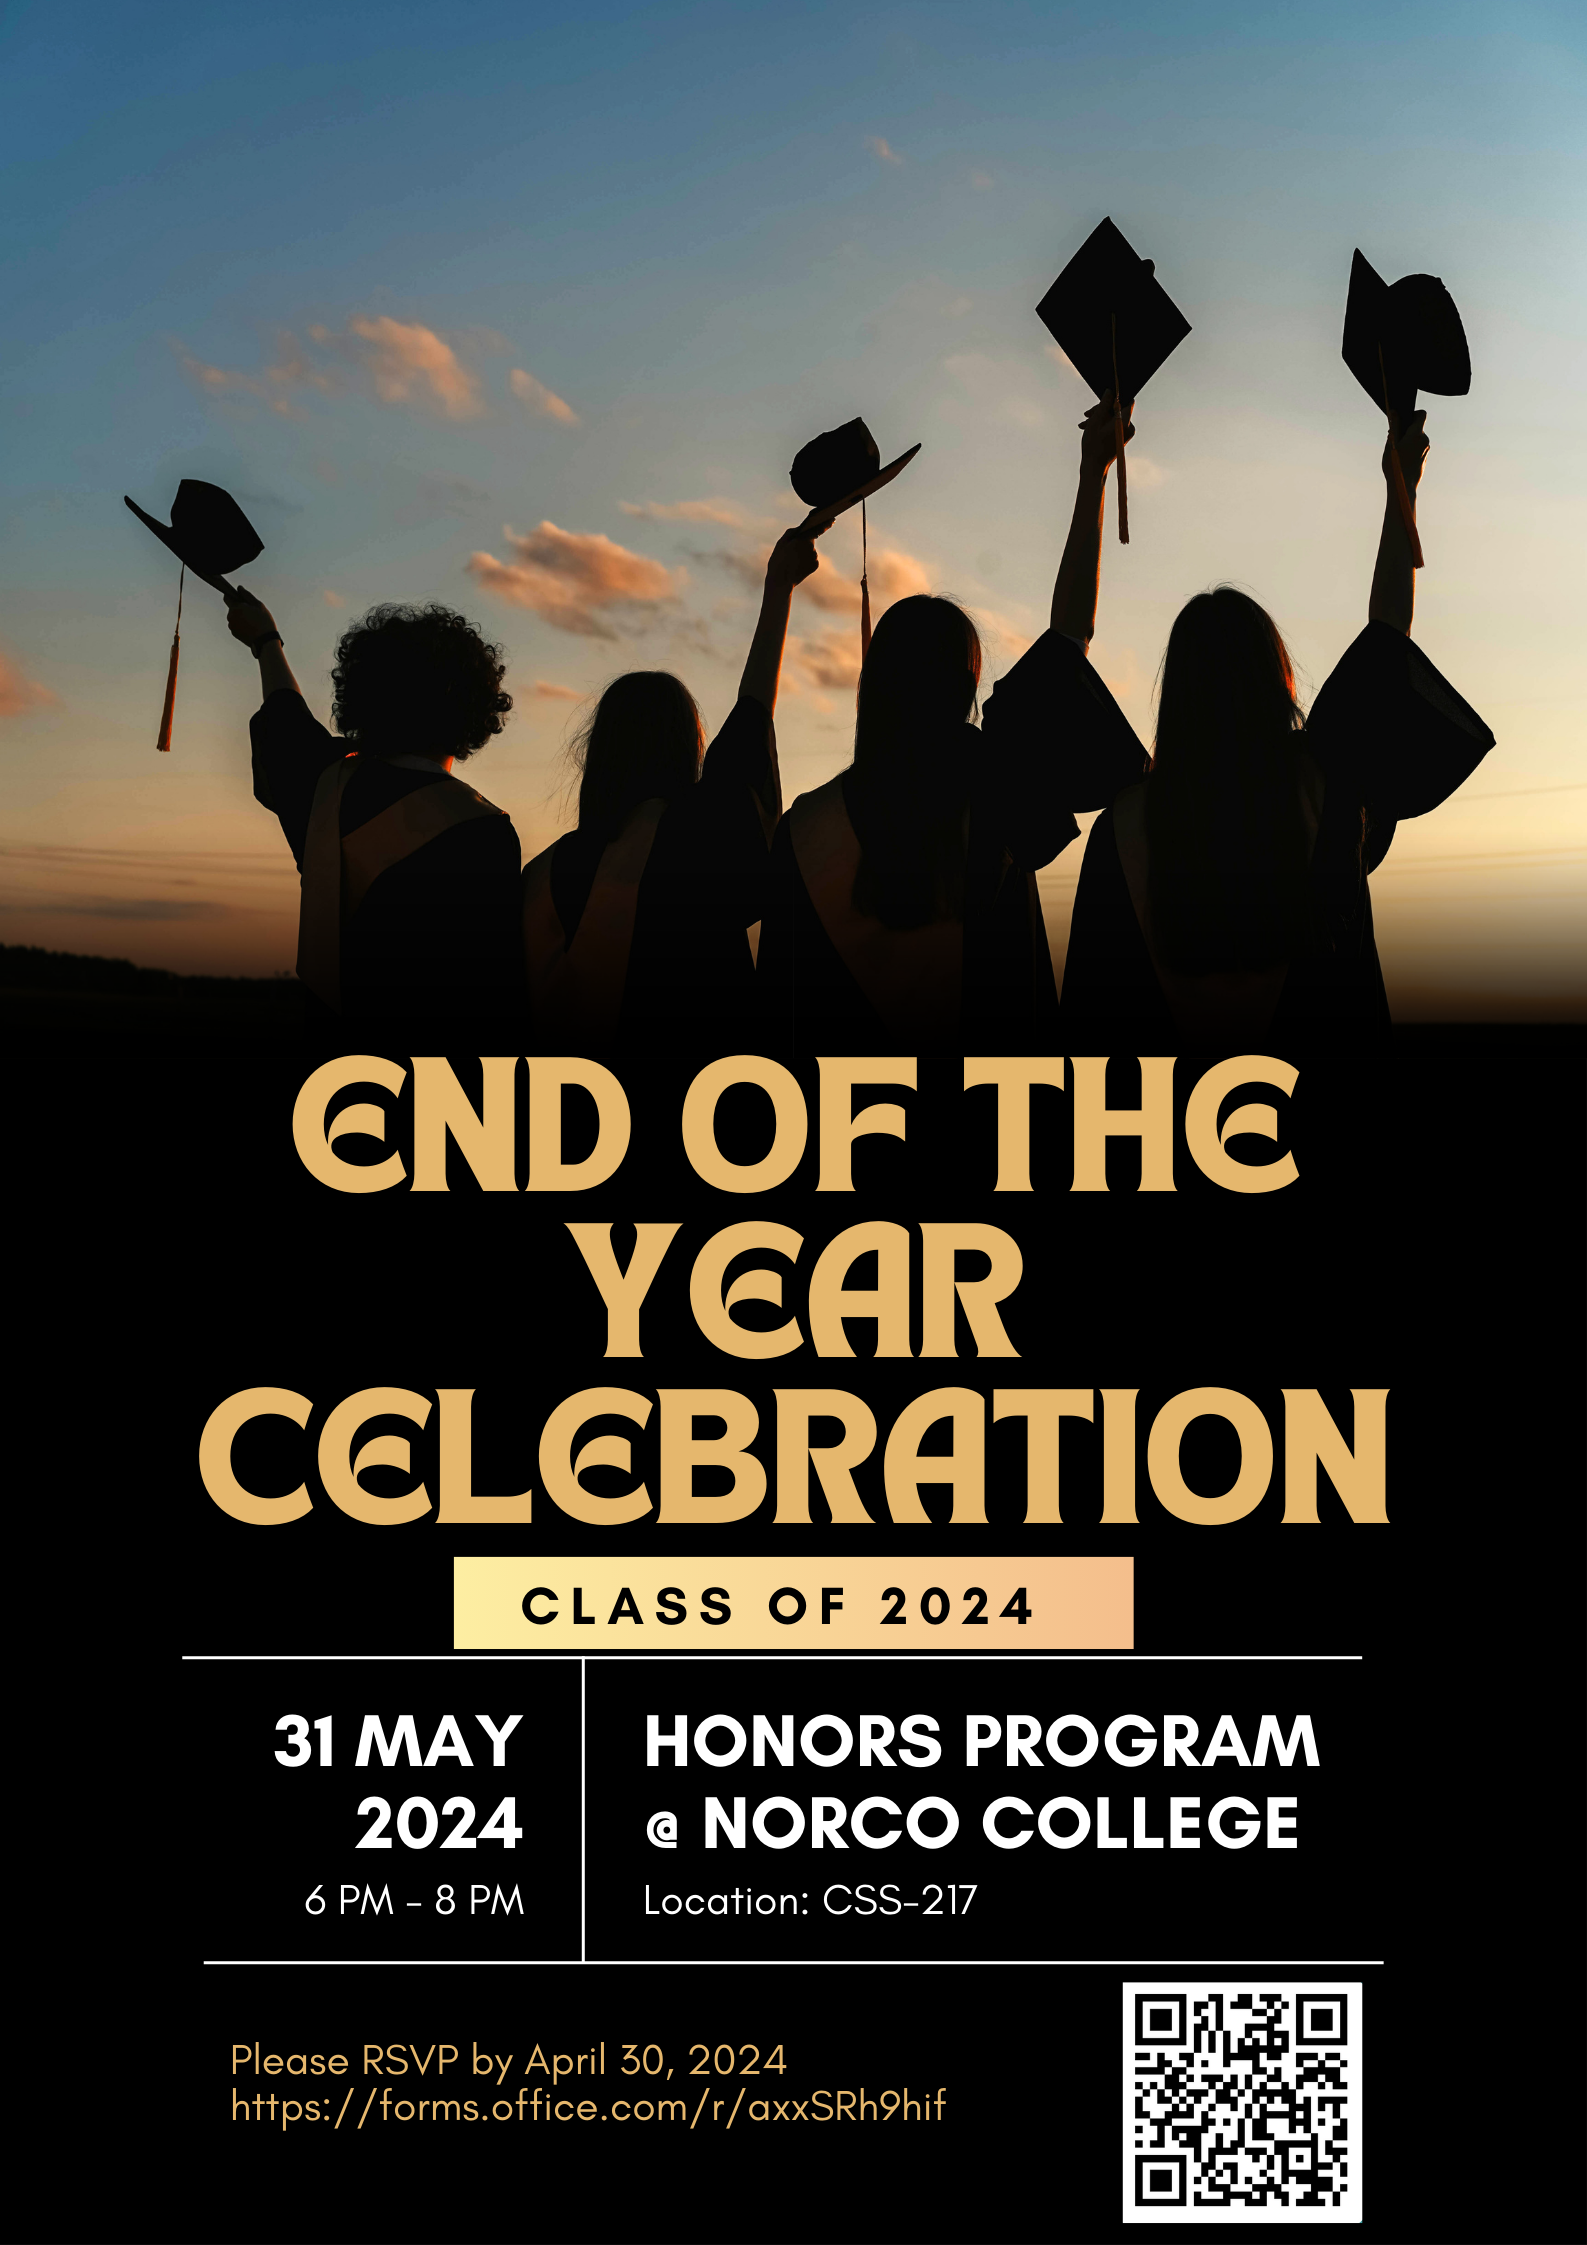 End of the Year Celebration Class of 2024 flyer